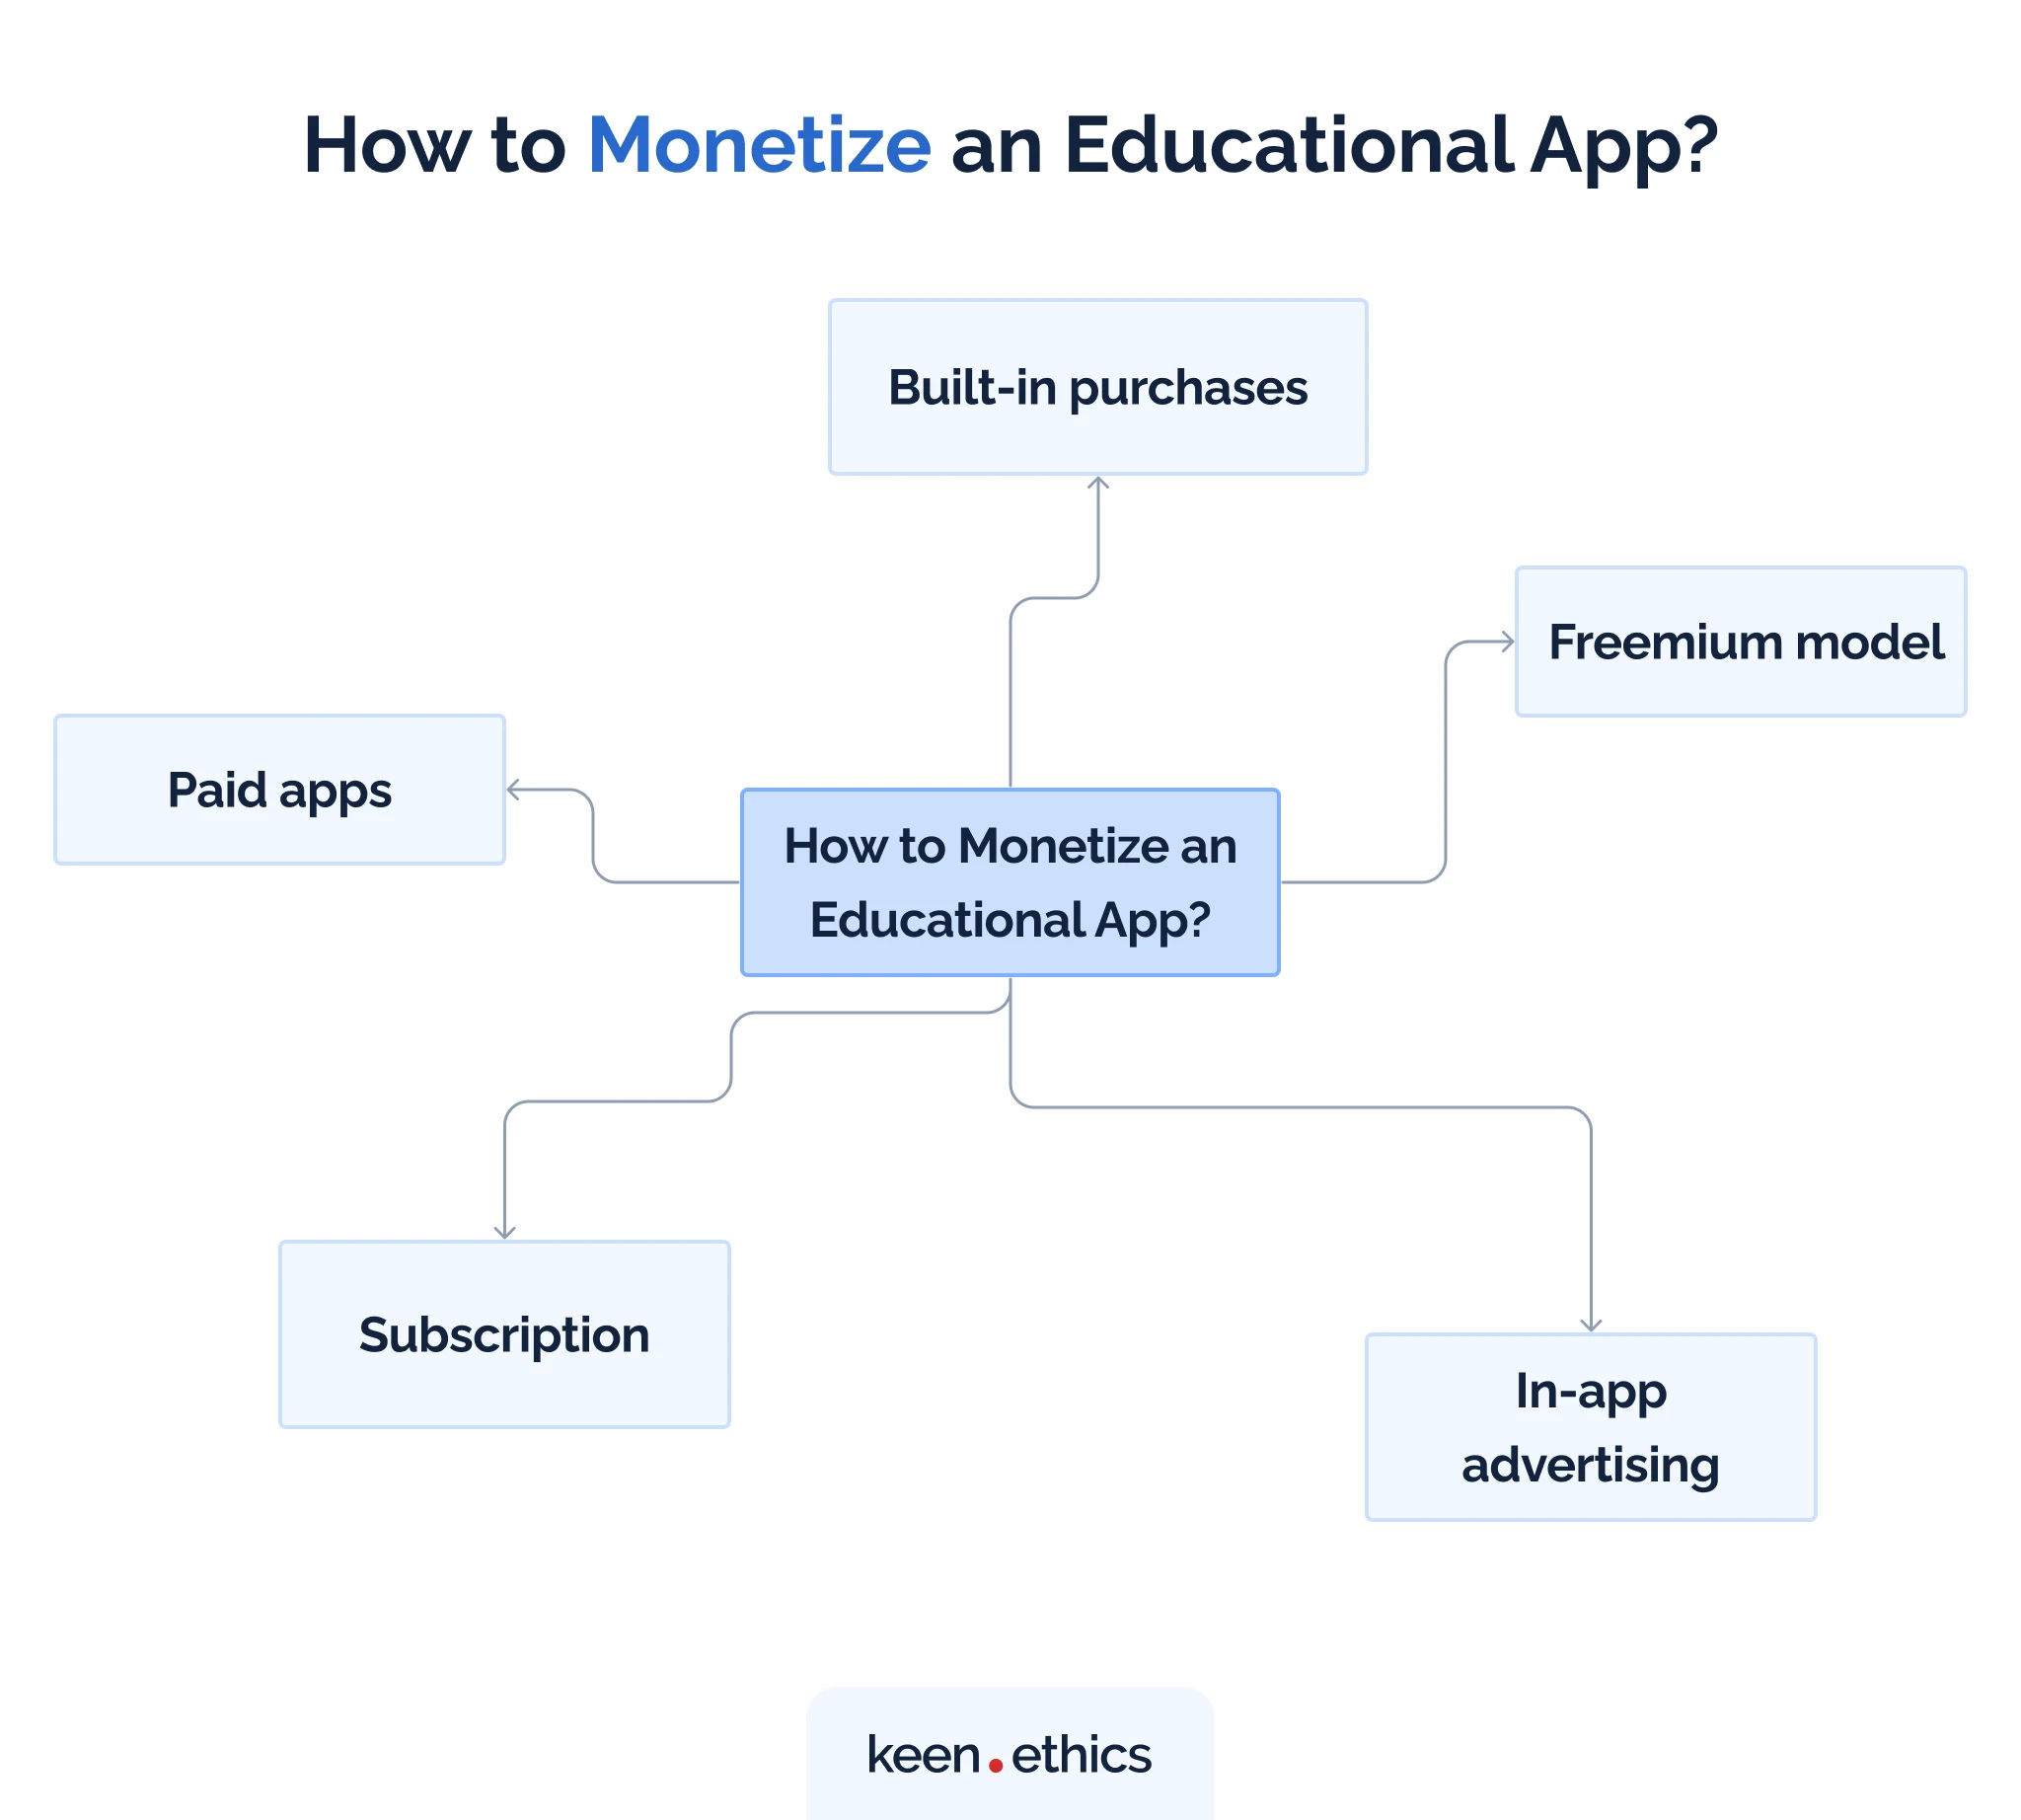 How to monetize an educational app